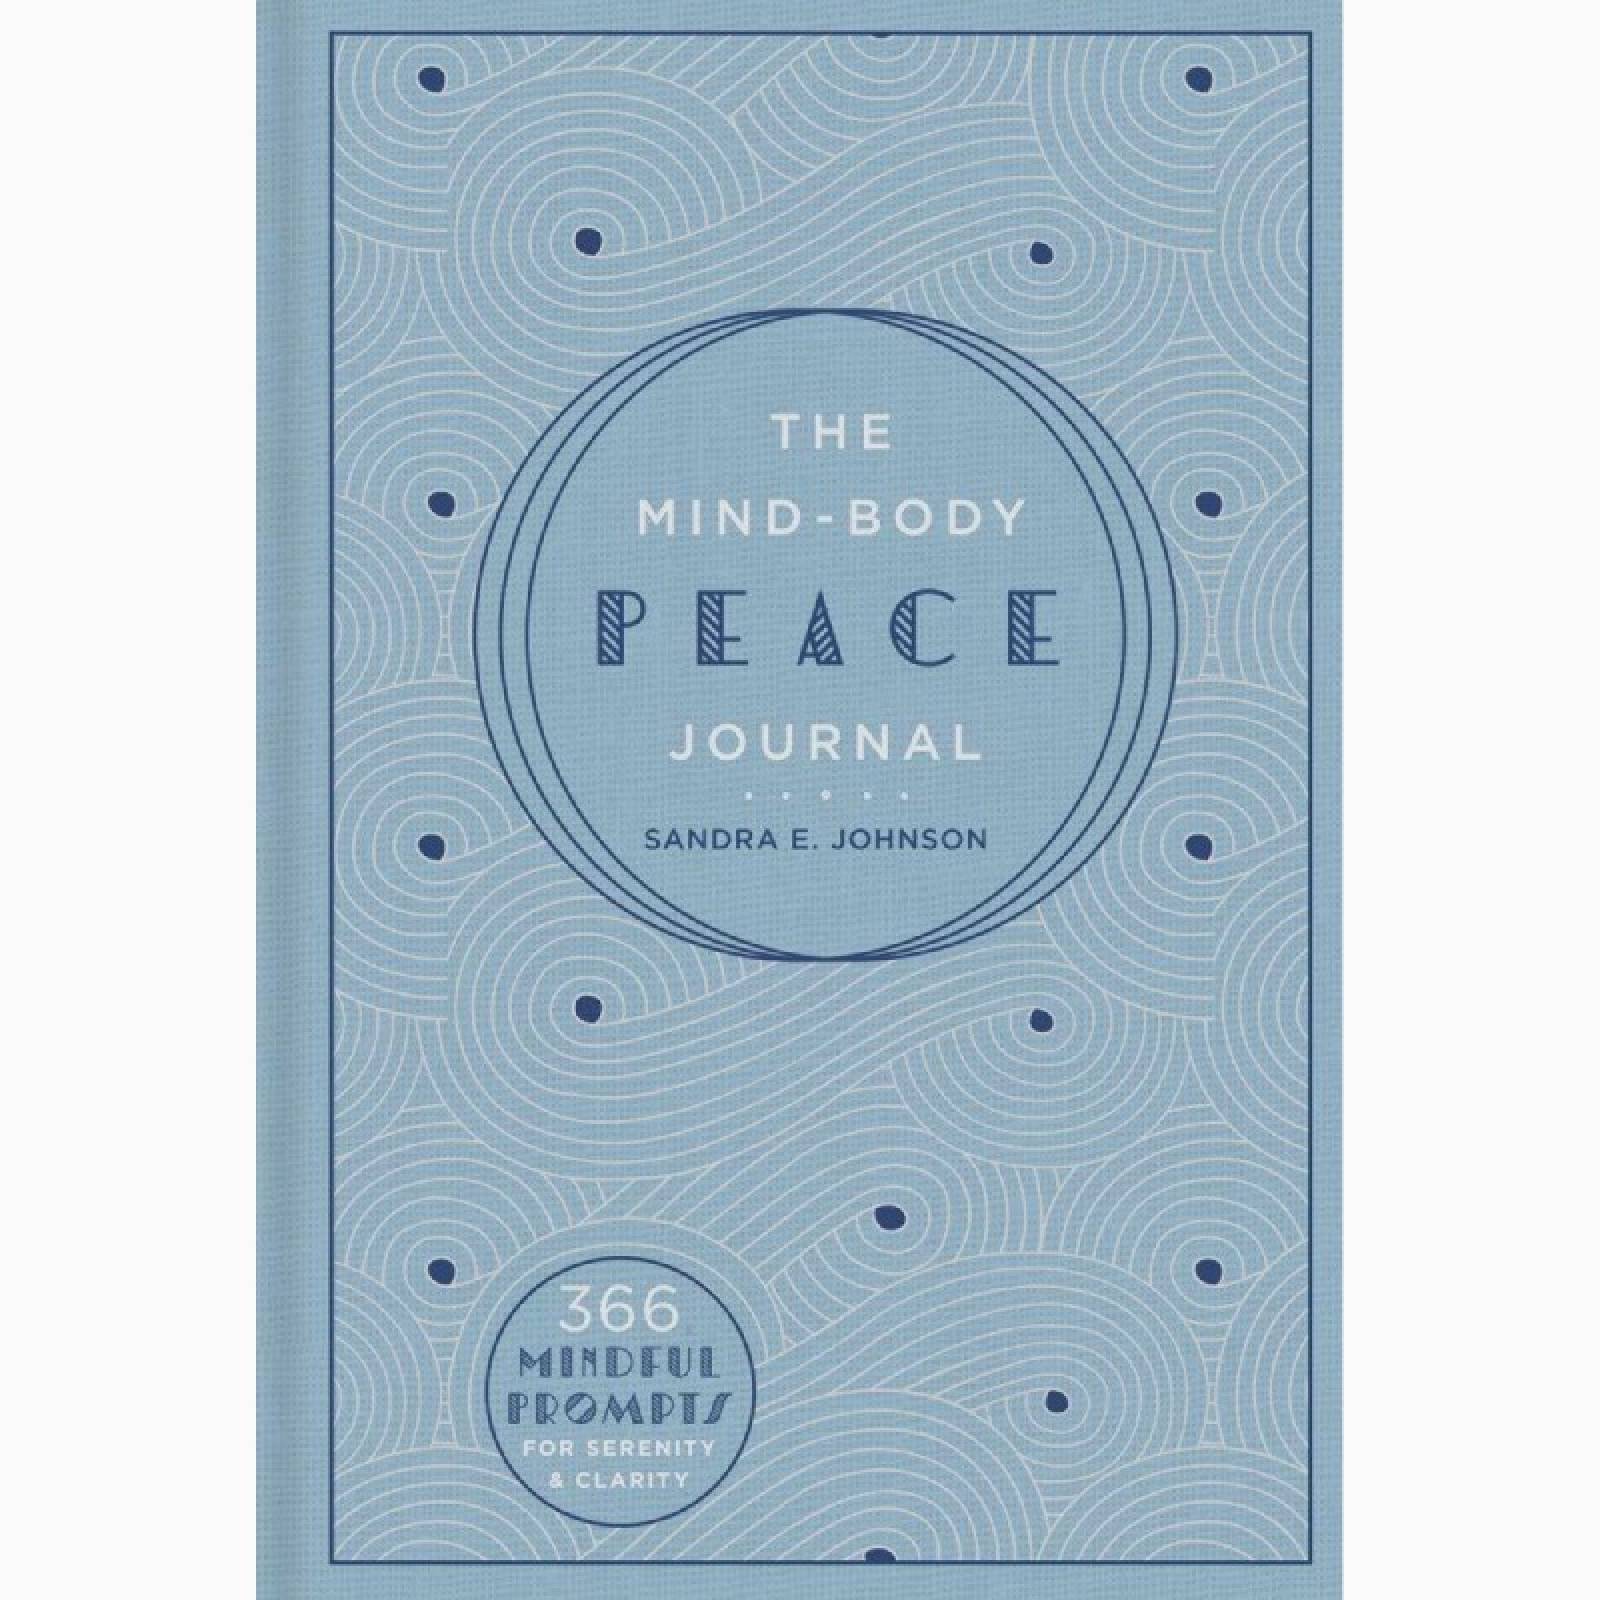 The Mind-Body Peace Journal thumbnails